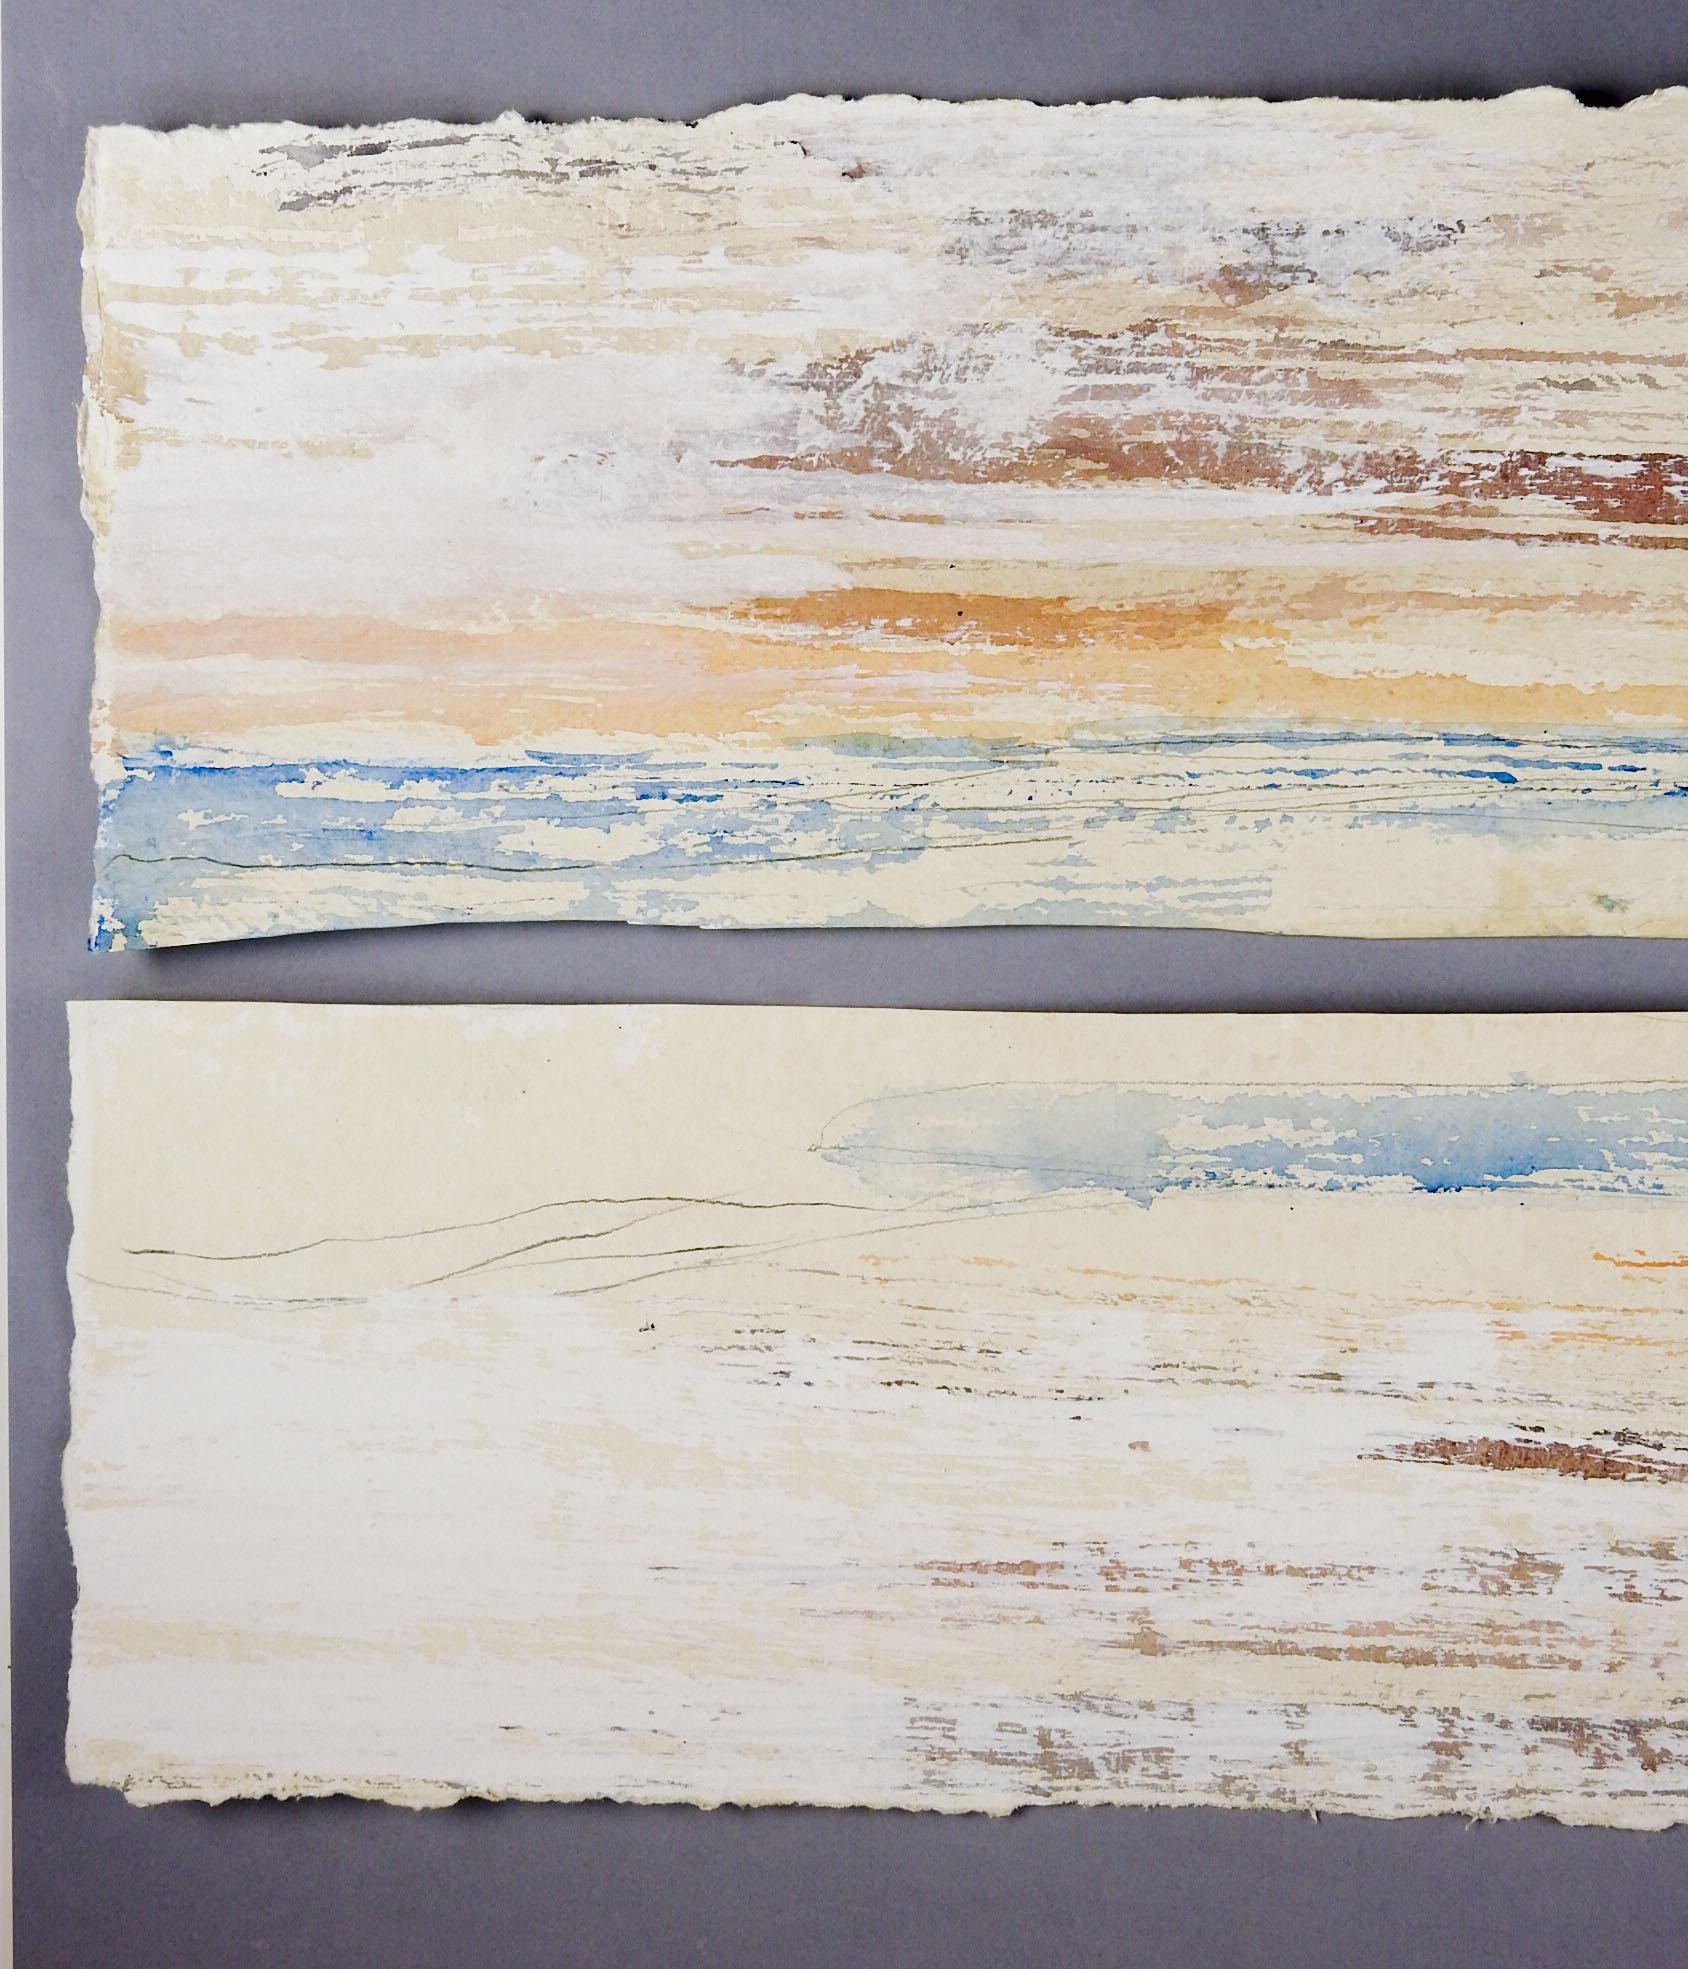 Abstract Mixed Media Coastal Scene Diptych In Good Condition For Sale In Seguin, TX